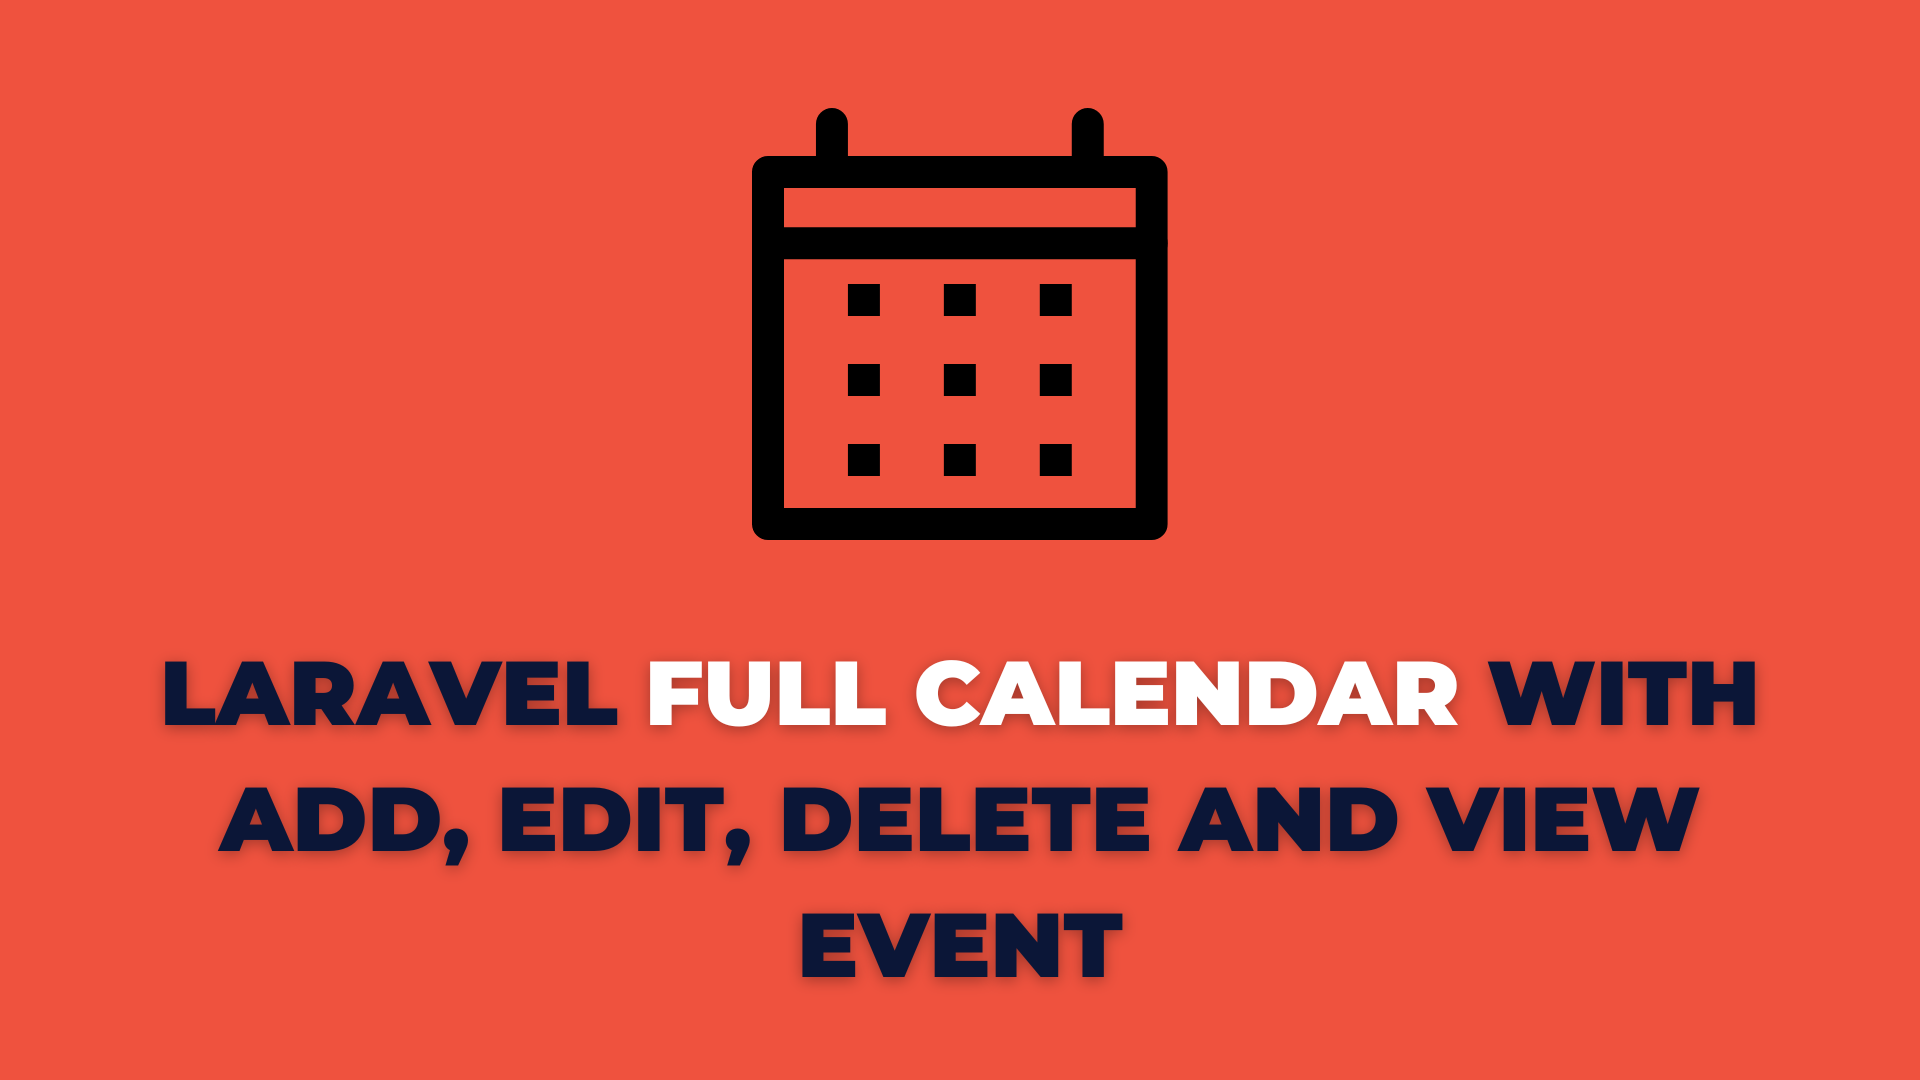 Laravel full calendar with add, edit, delete and view event